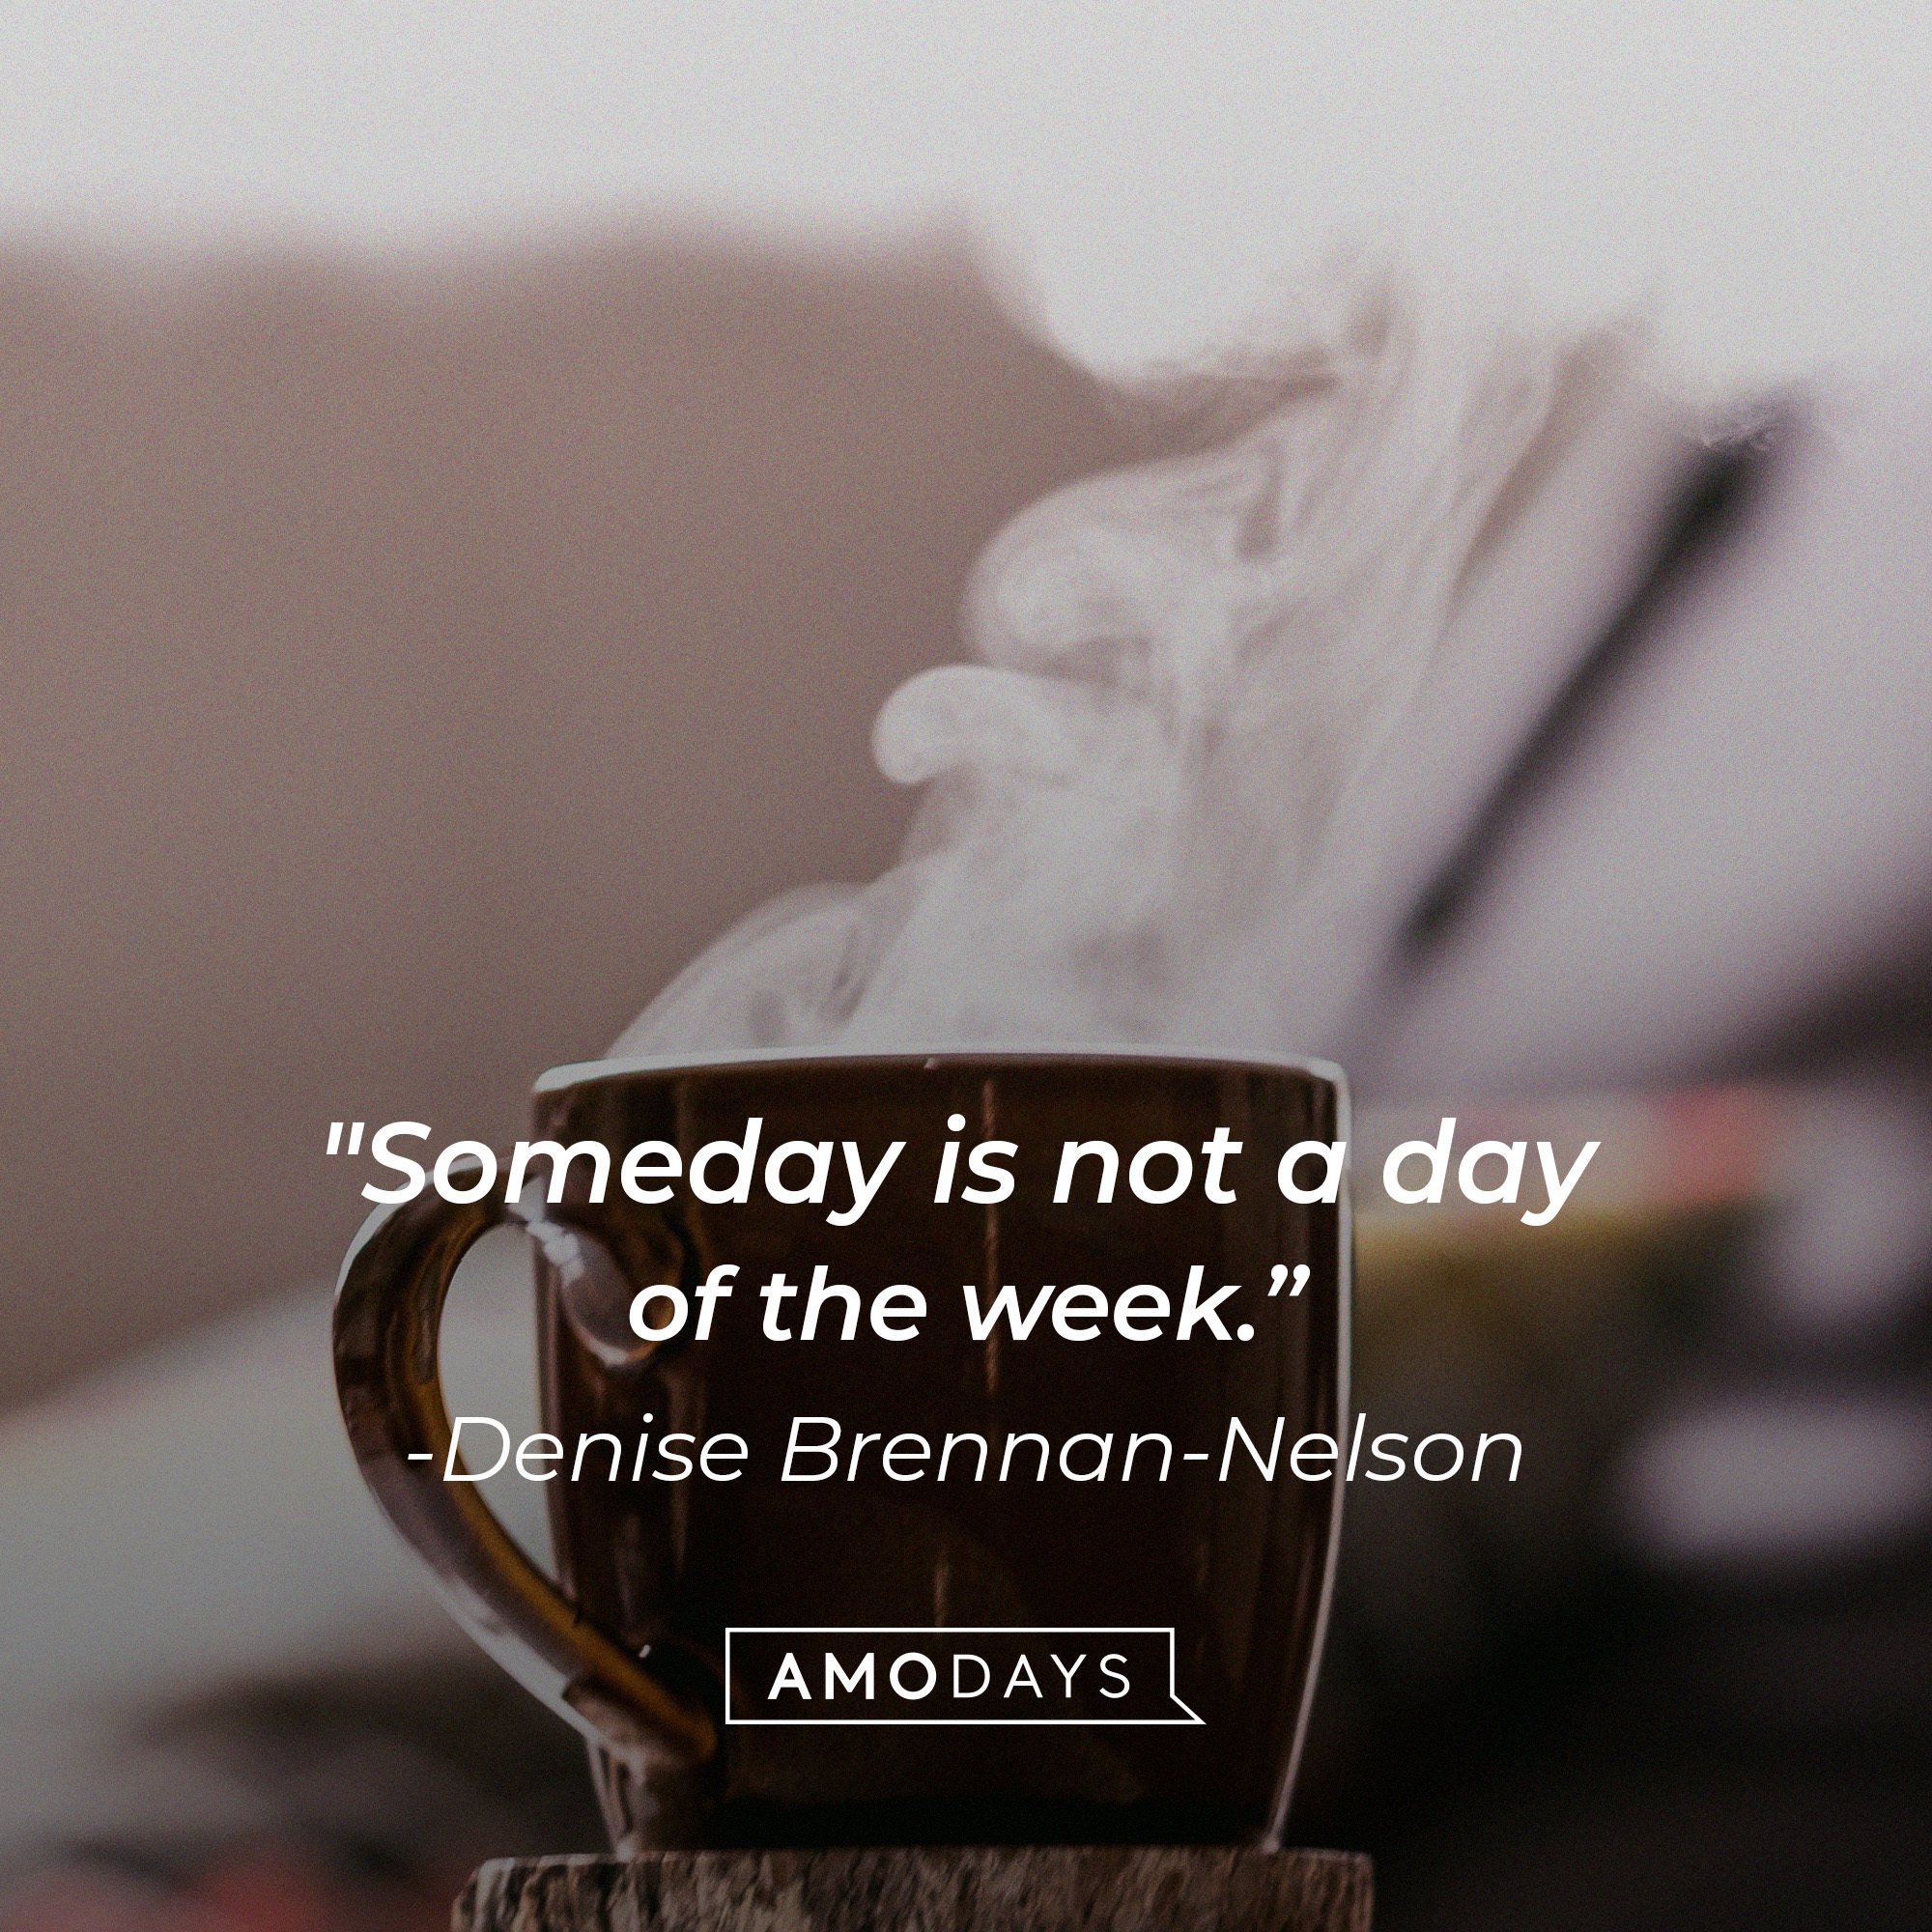 Denise Brennan-Nelson-s quote:  “Someday is not a day of the week.” | Image: AmoDays 